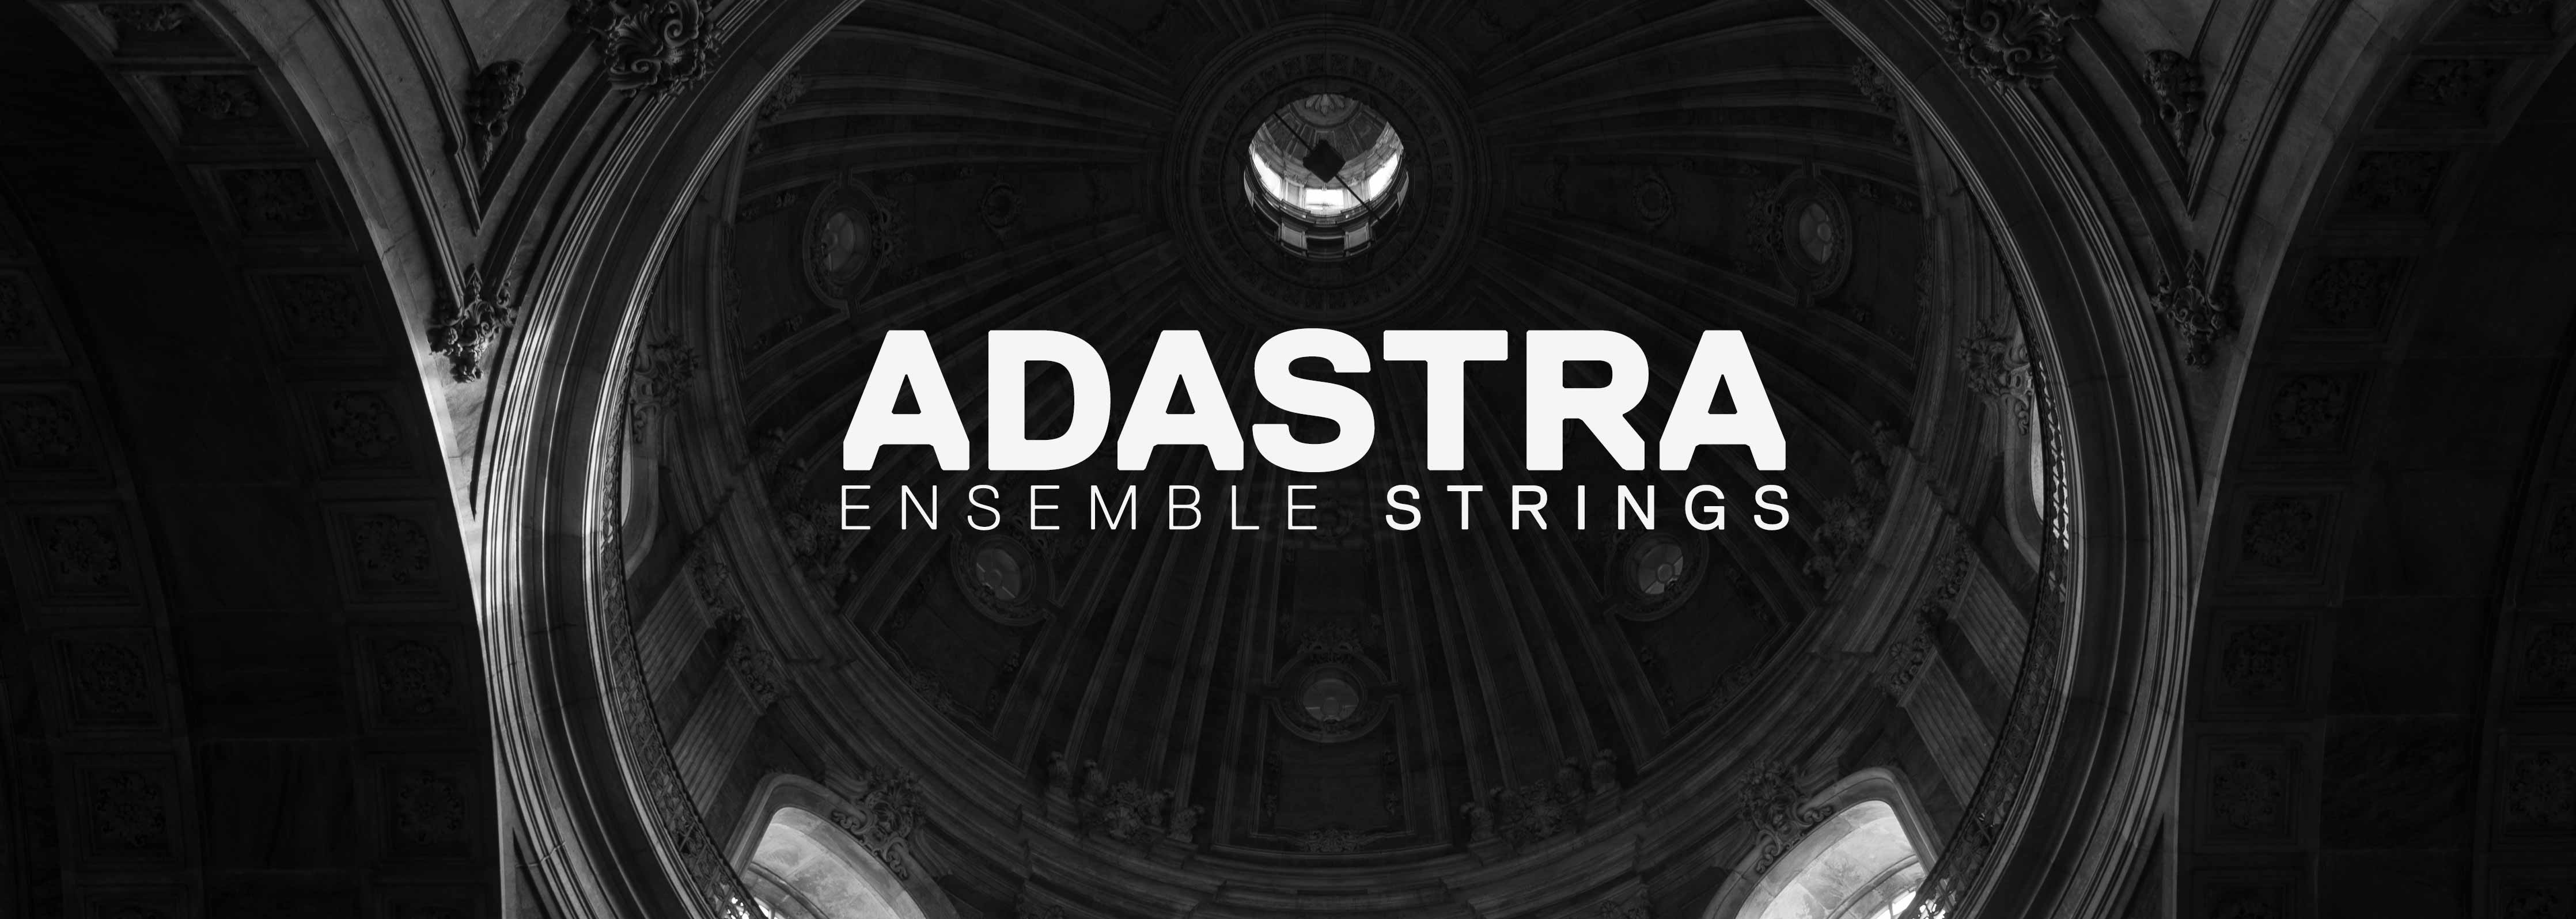 Set out on your interstellar journey with Adastra Ensemble Strings - Available Now